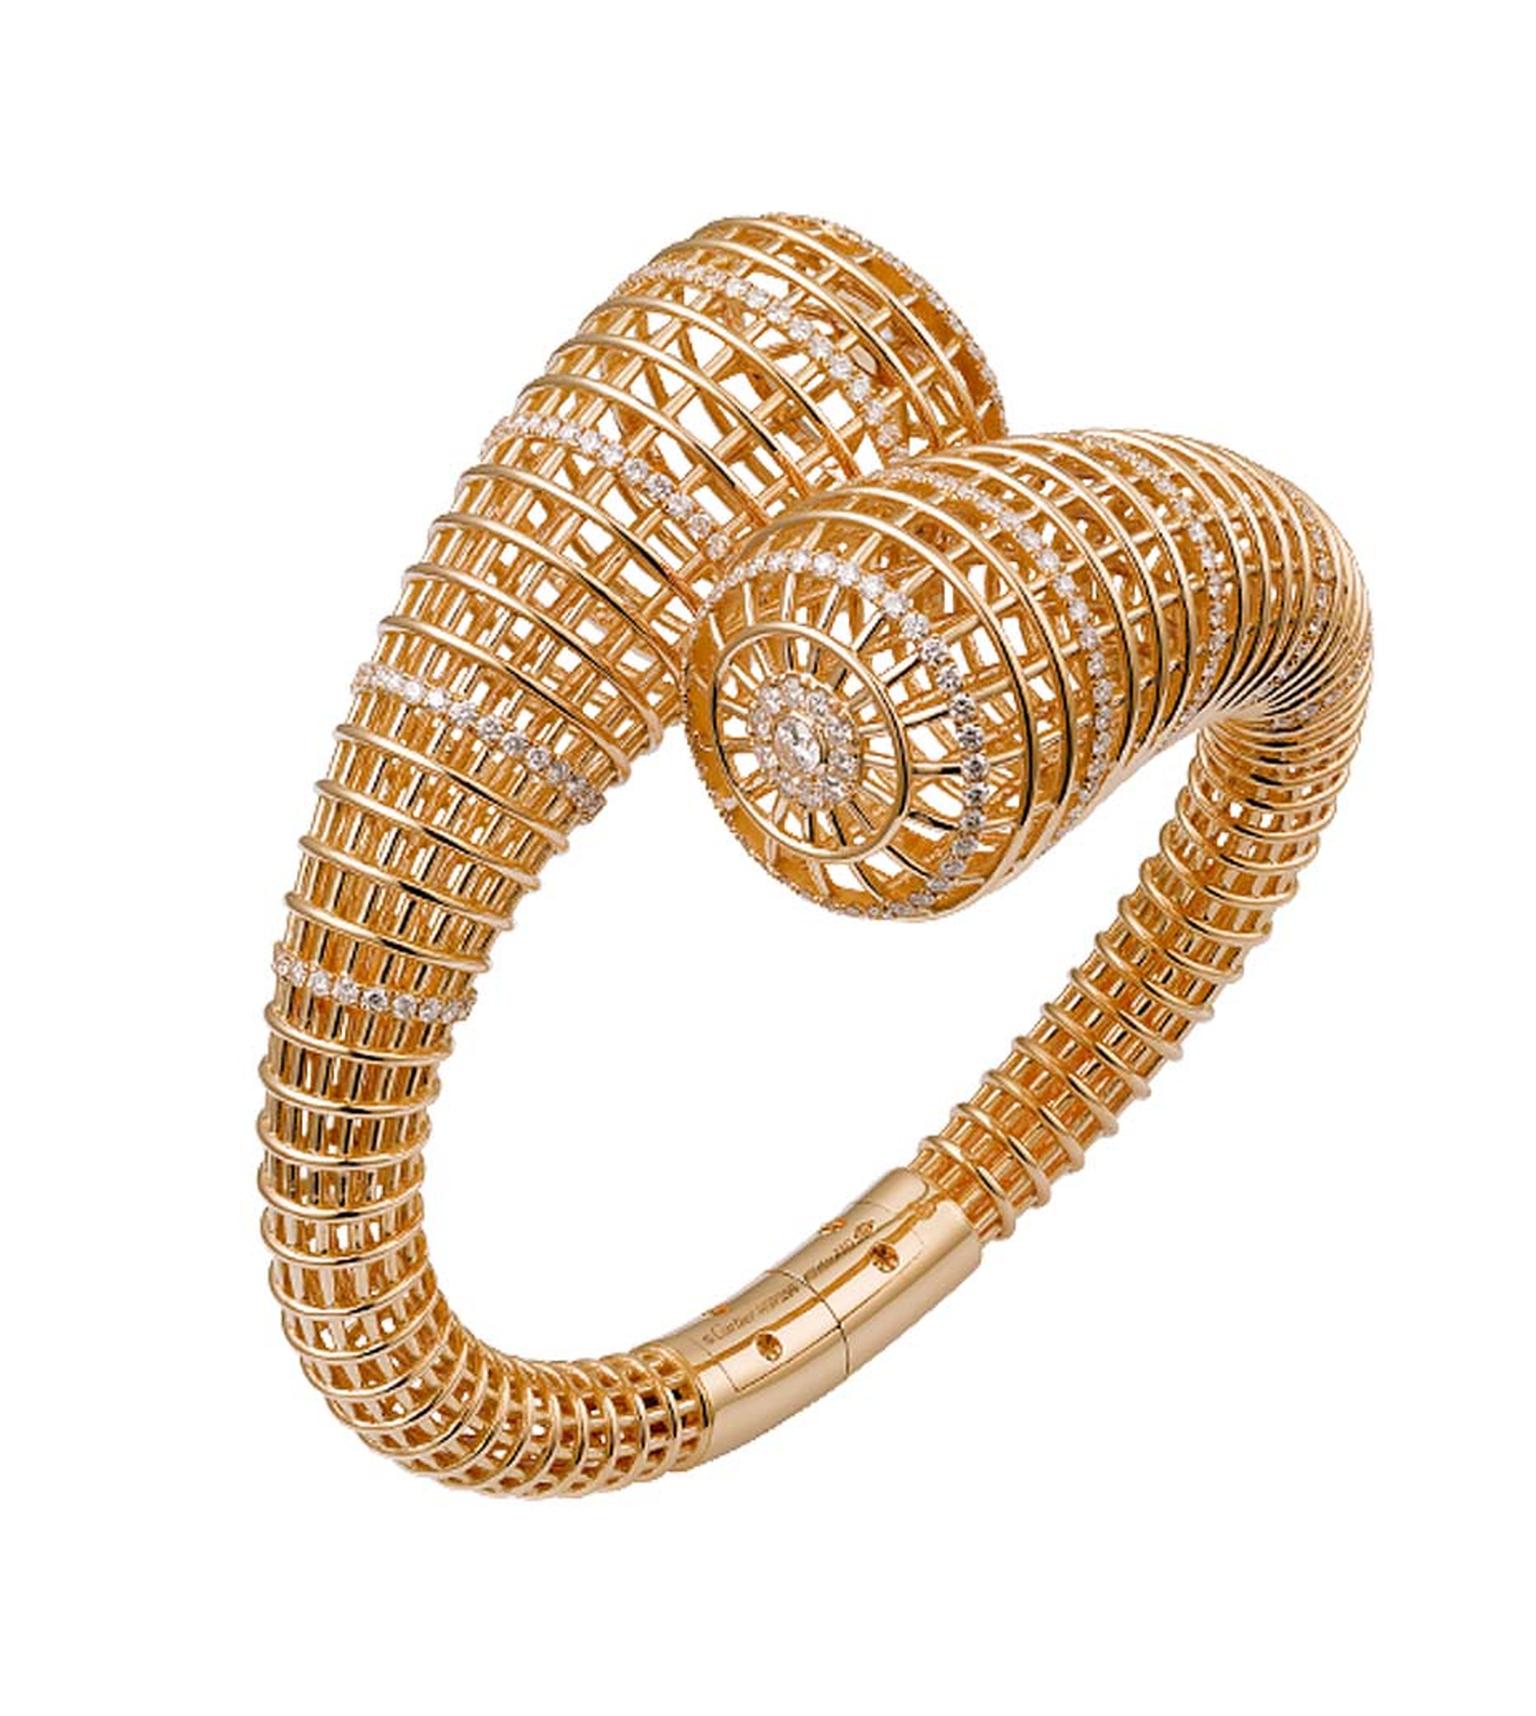 This exquisite latticed gold and diamond bracelet from the new collection of Paris Nouvelle Vague jewels from Cartier was inspired by the rippling waters and bridges that span the Seine.